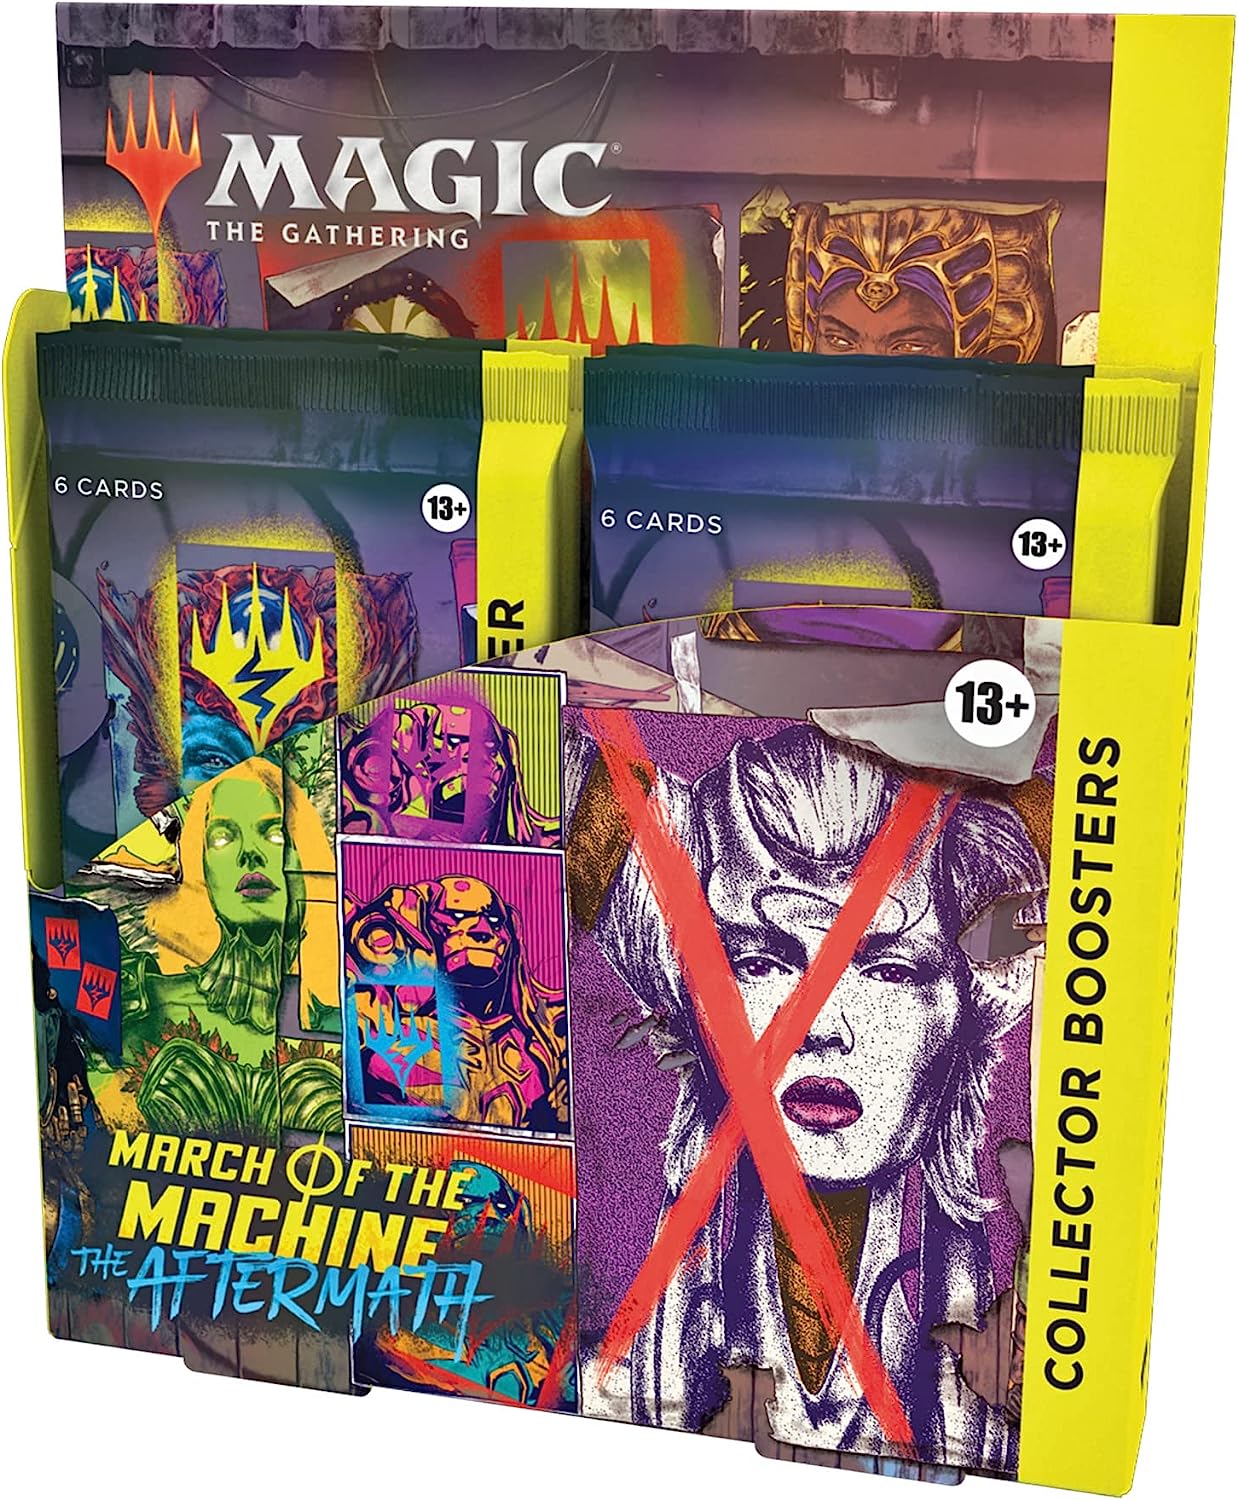 Collector Booster Box- March of the Machine The Aftermath